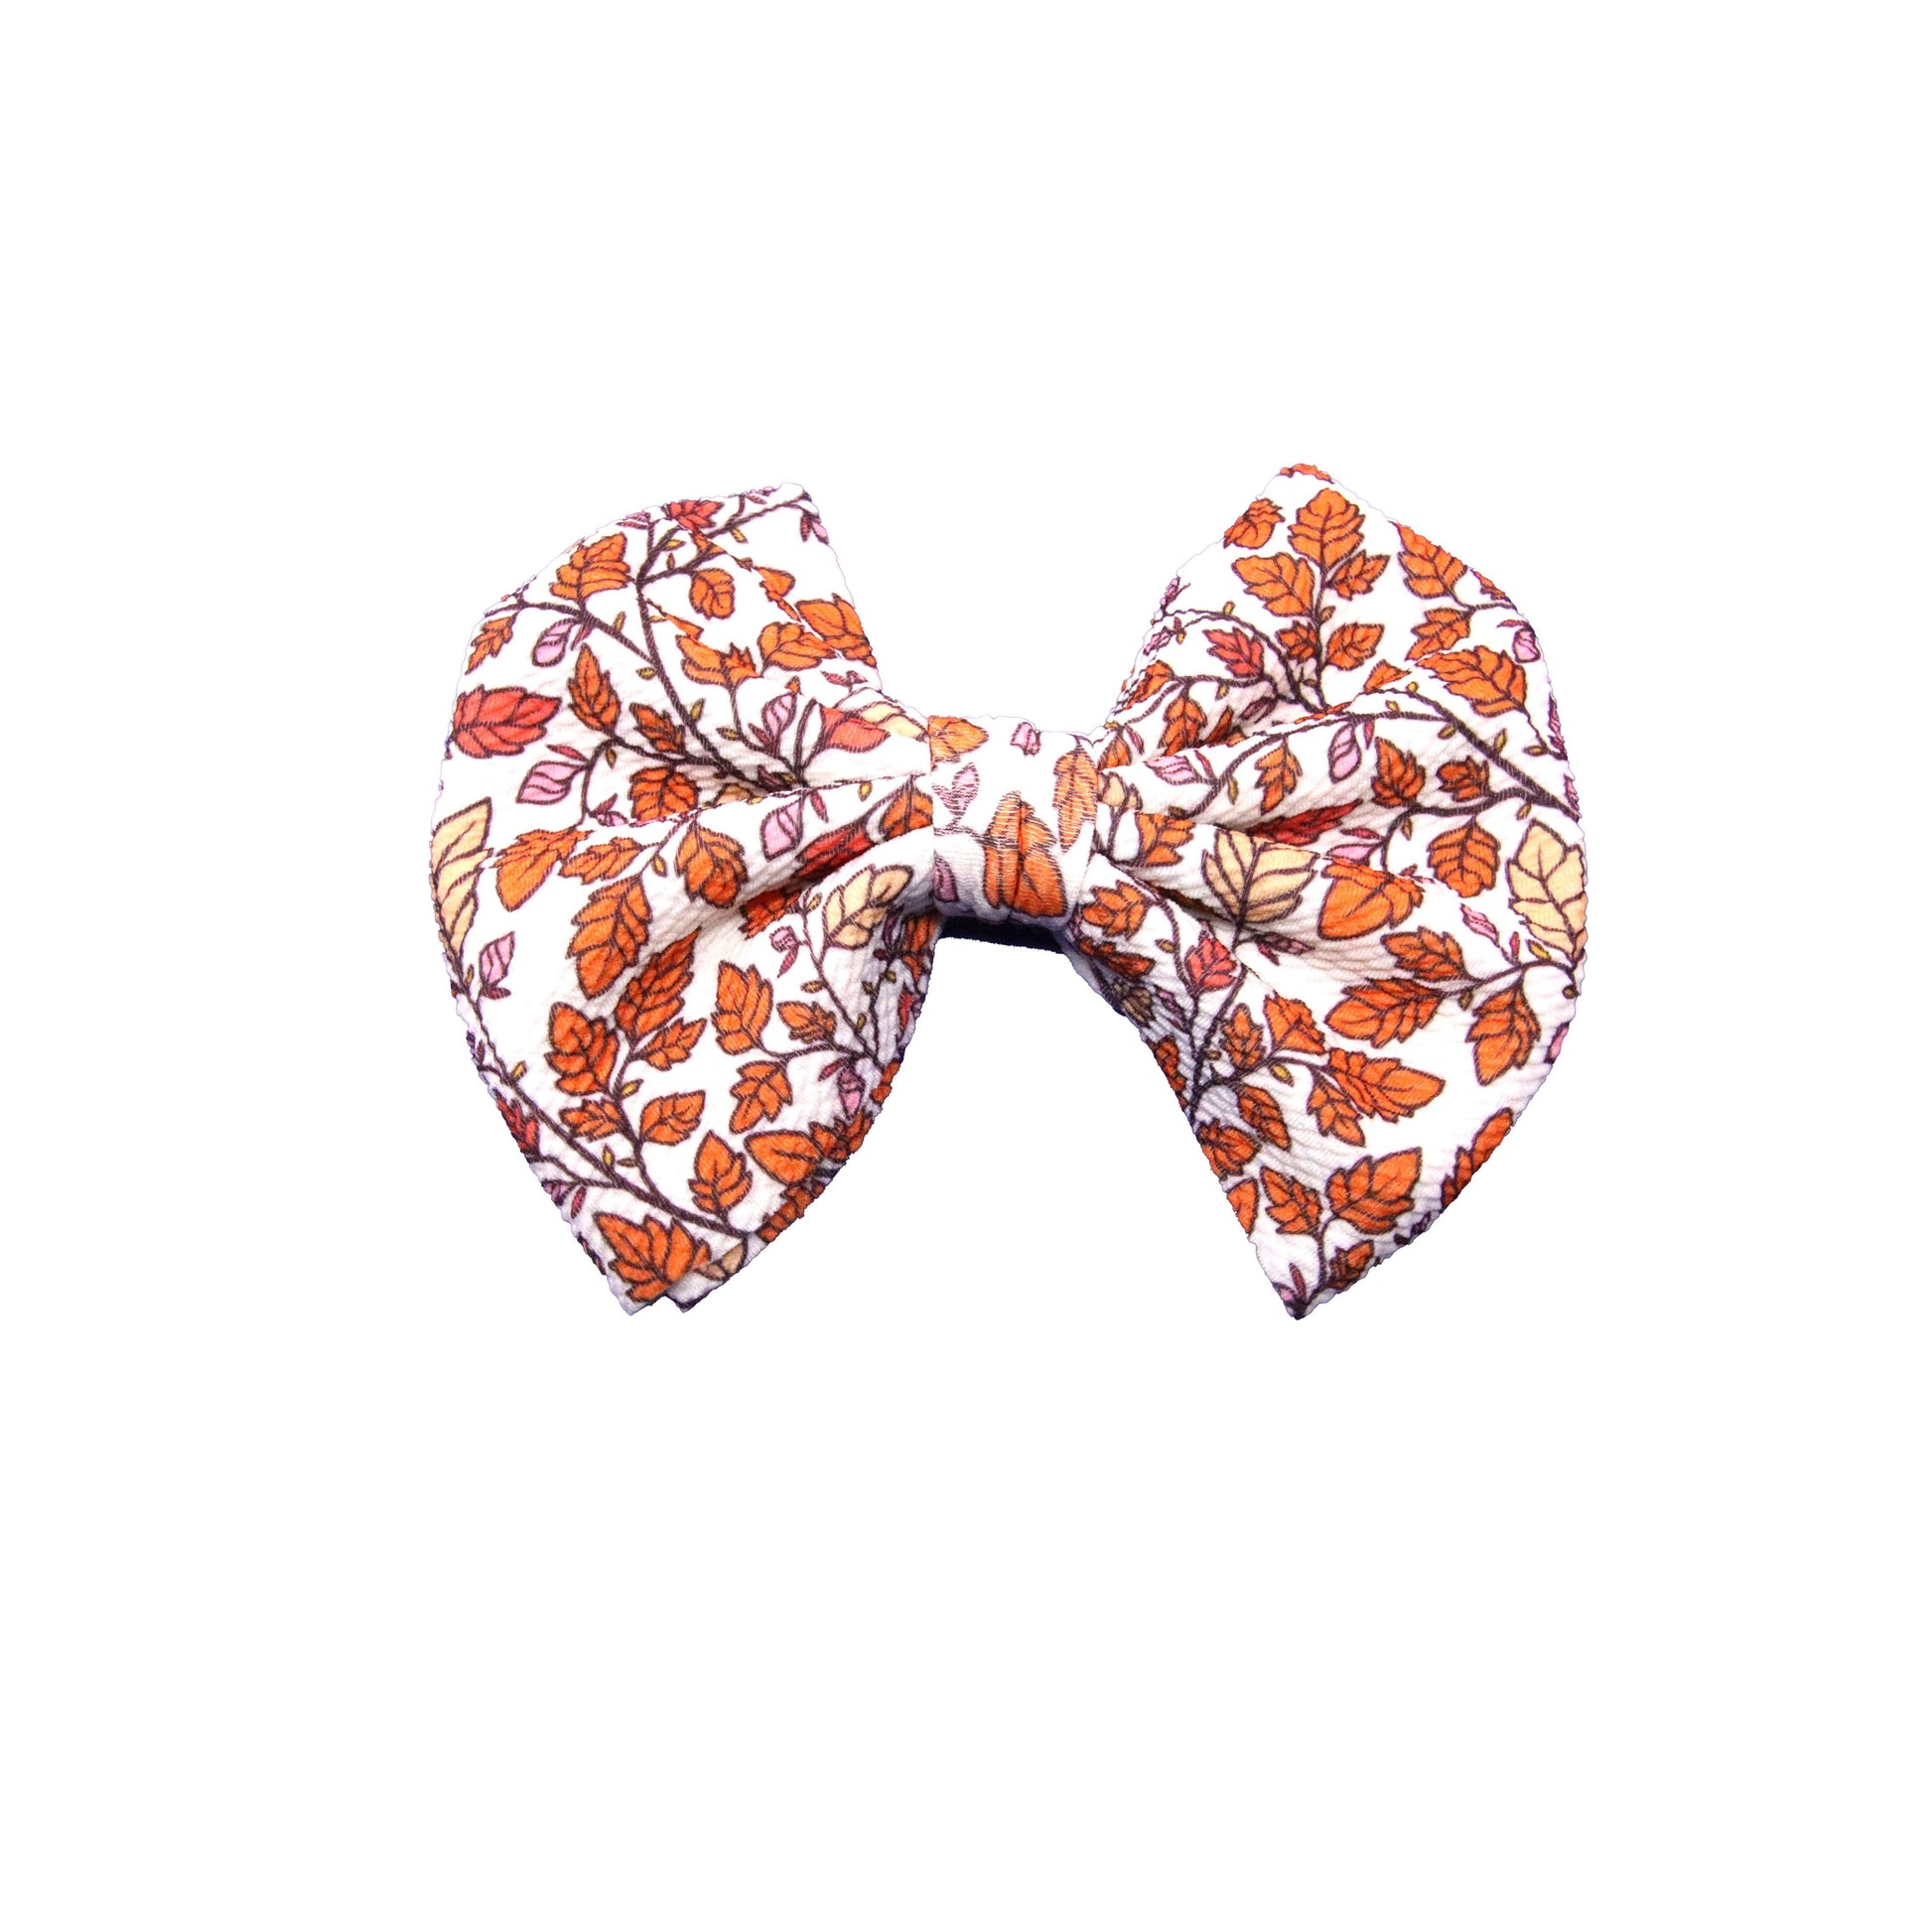 7", Bow, Hair Bow, Windblown Leaves, Fabric Bow, New Product - 04OCT2020